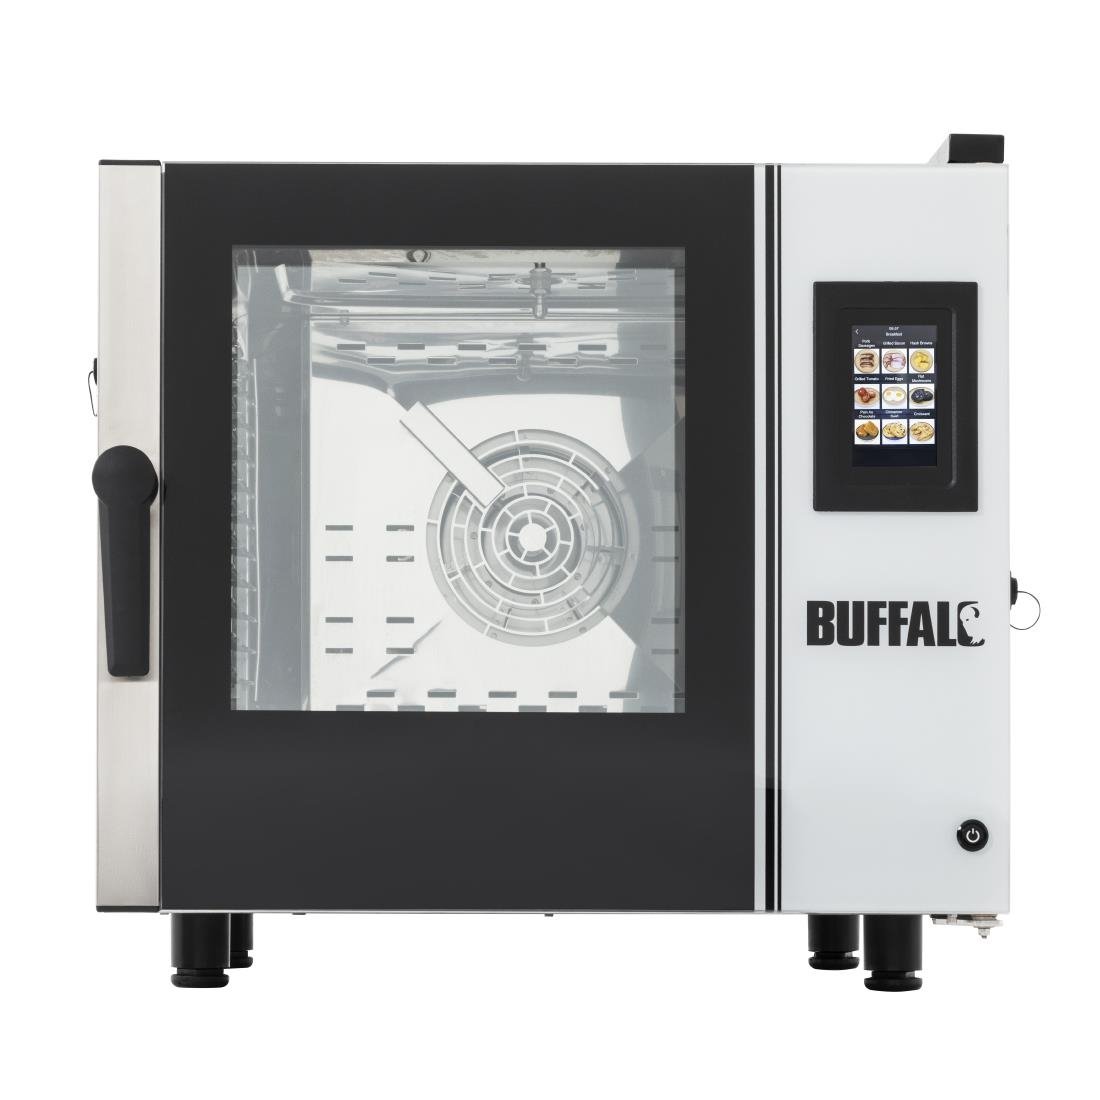 SA775 Buffalo Smart Touchscreen Compact Combi Oven  6 x GN 1/1 with Installation Kit